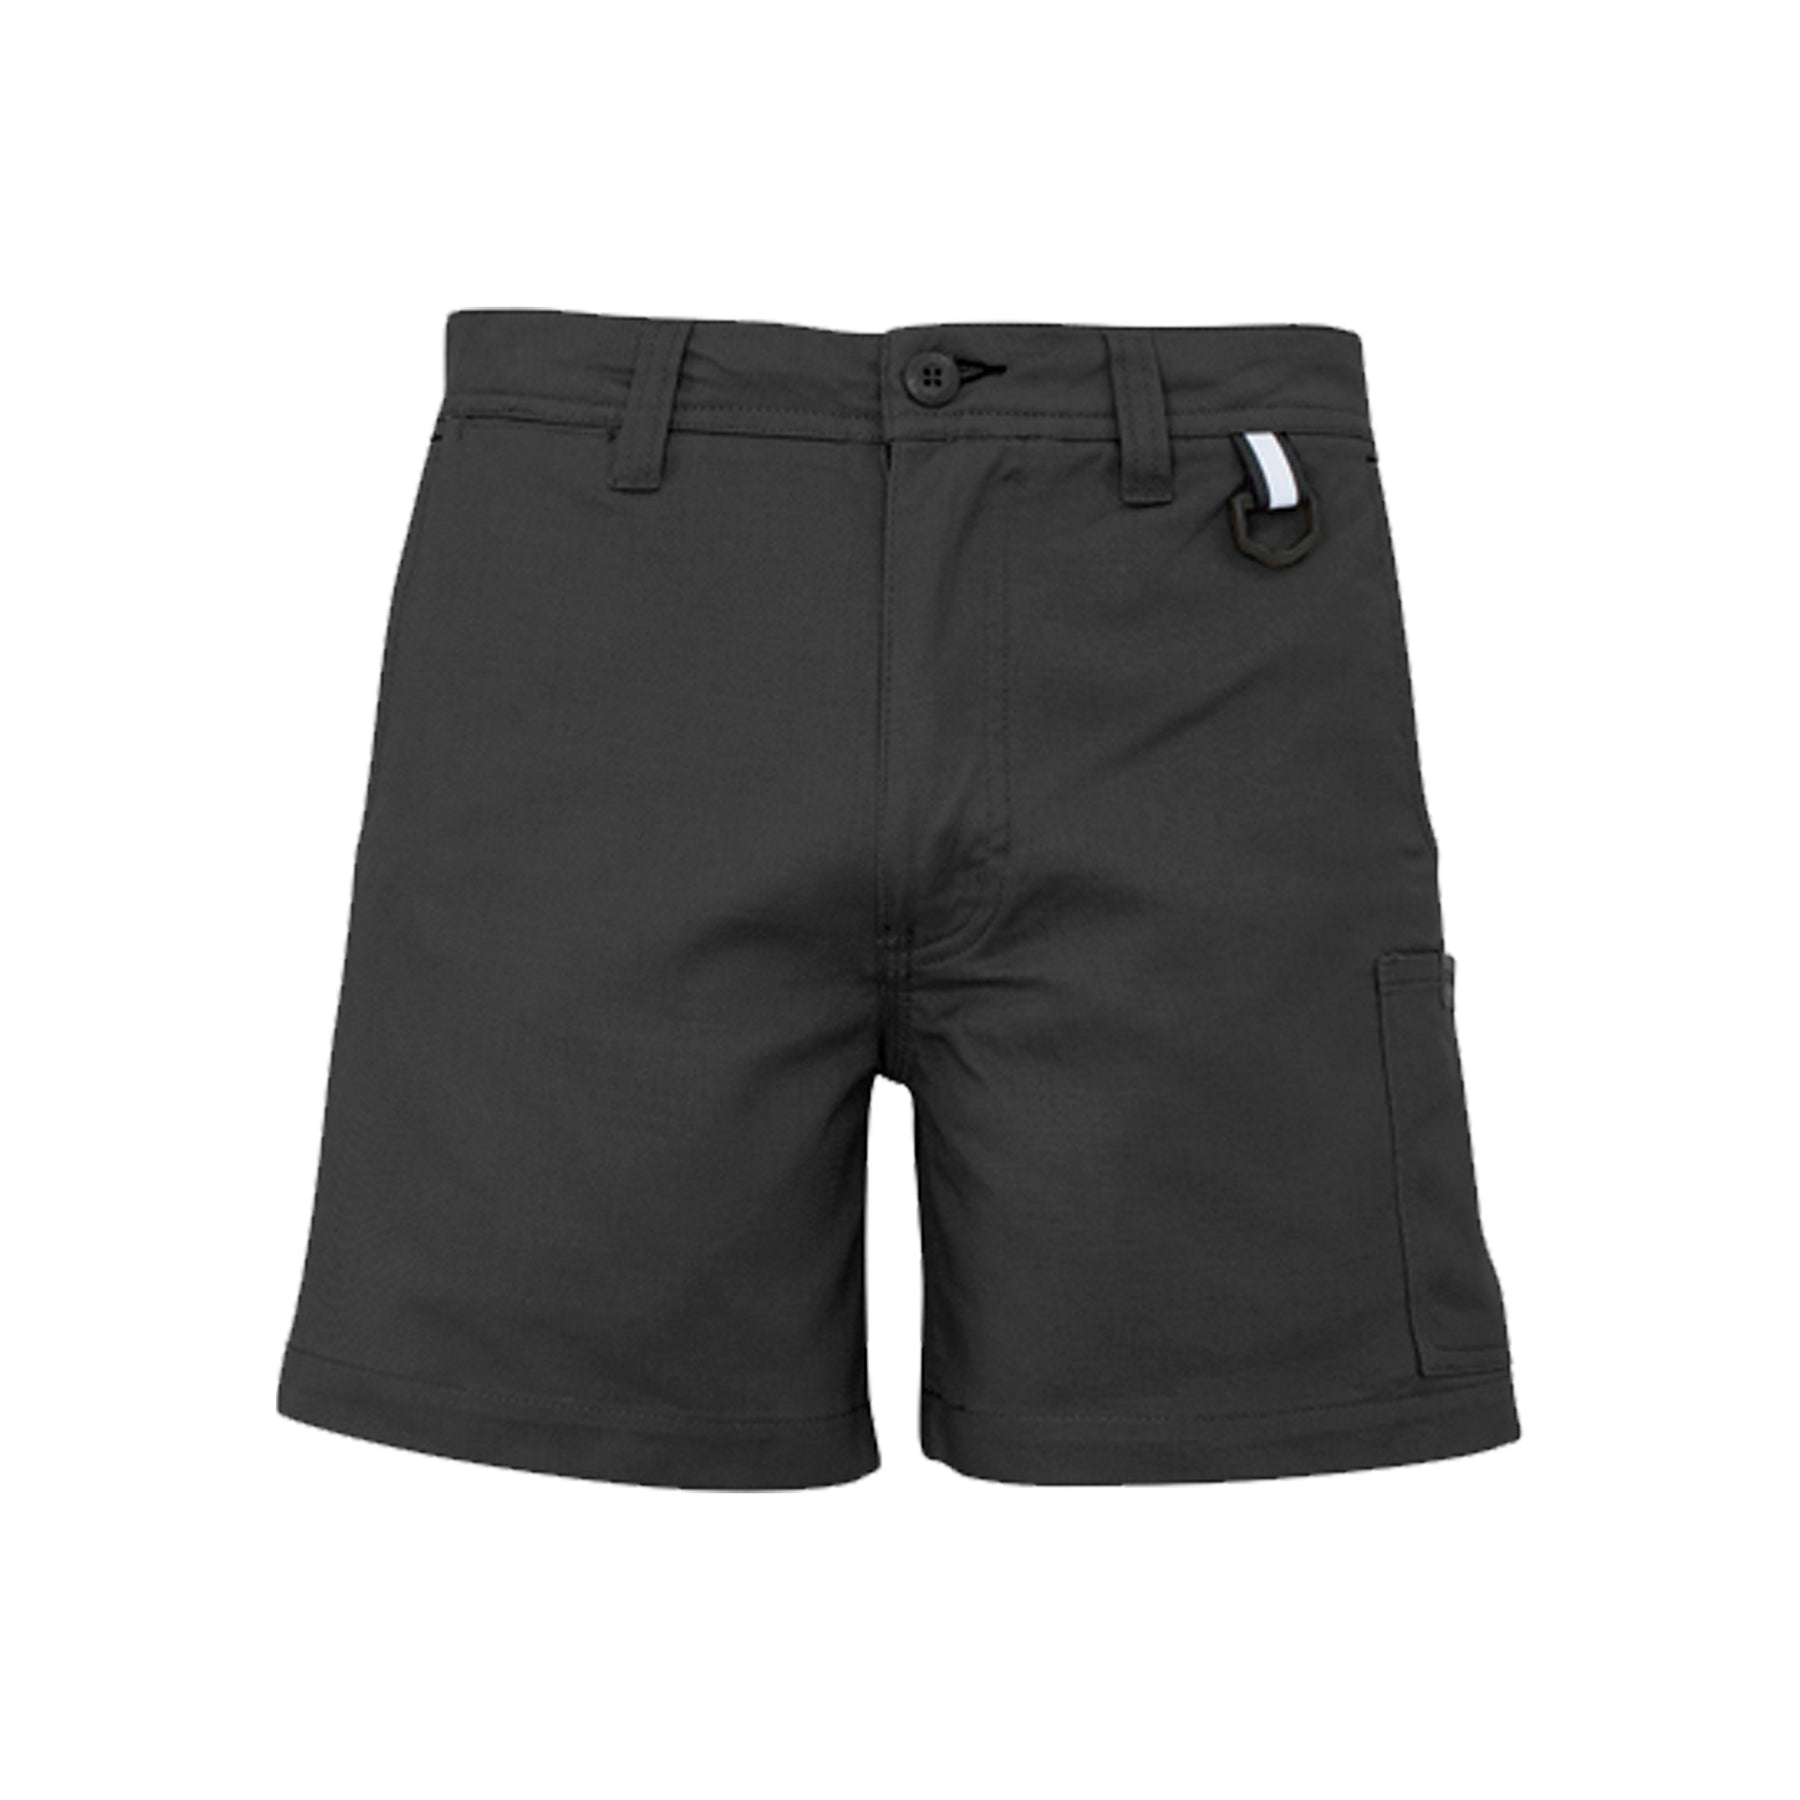 rugged cooling short short in charcoal